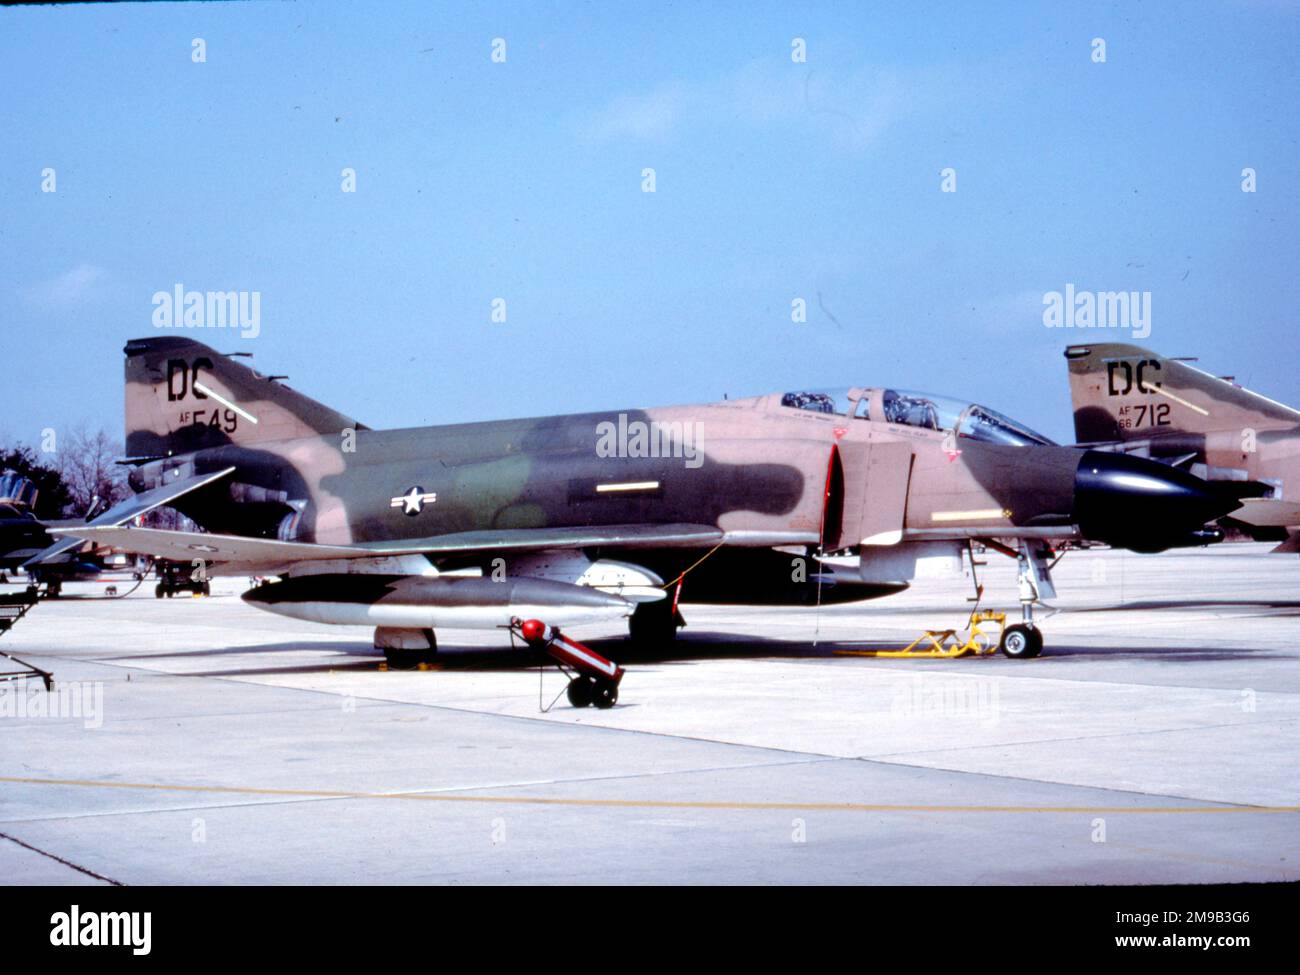 United States Air Force - McDonnell F-4D-30-MC Phantom 66-7549 (msn 2084, codice base DC), del 121st Tactical Fighter Squadron - 113rd Tactical Fighter Wing, Washington D.C. Air National Guard presso la base dell'aeronautica di Andrews, Maryland. Foto Stock